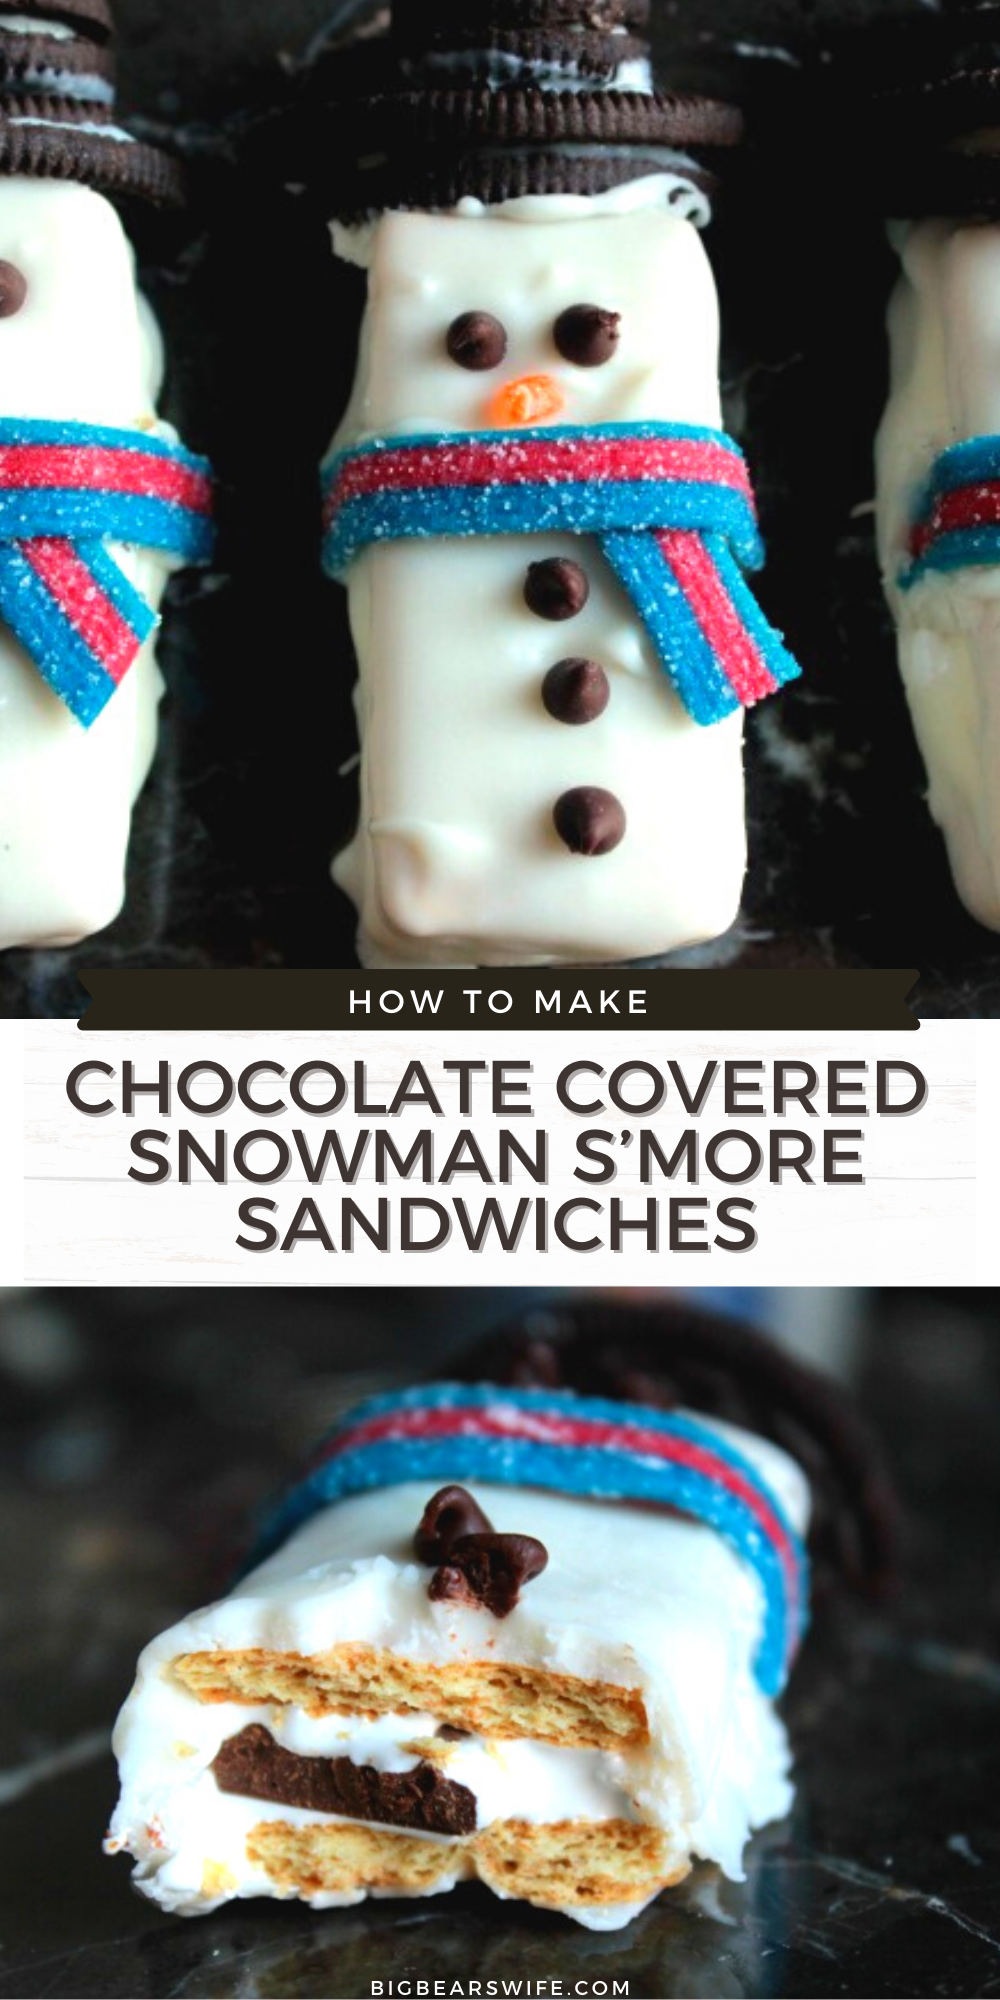  Graham Crackers, Marshmallow, Chocolate and Candies make up these Chocolate Covered Snowman S'more Sandwiches! Top them with Oreo hats and candy scarfs and serve them at your Holiday Party! via @bigbearswife